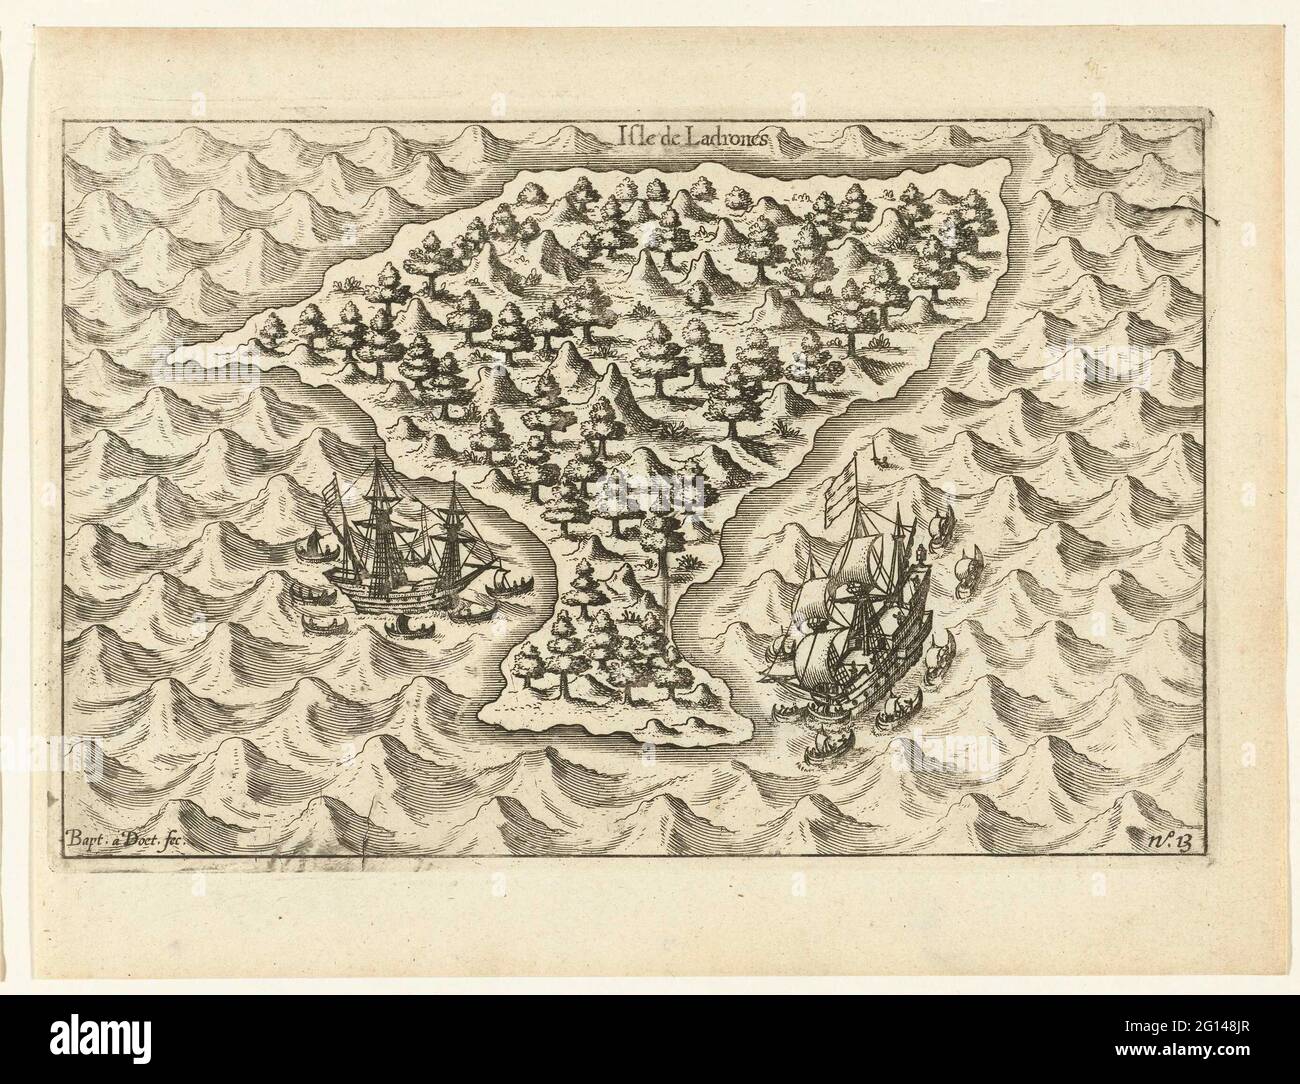 The two ships at one of the ladries or Mariana islands, 1600; Isle the ladrones. The two ships at one of the ladrones or Mariana Islands, September 15, 1600. Part of the illustrations in the report of the journey to the world through Olivier van Noort in 1598-1601. No 13. Stock Photo